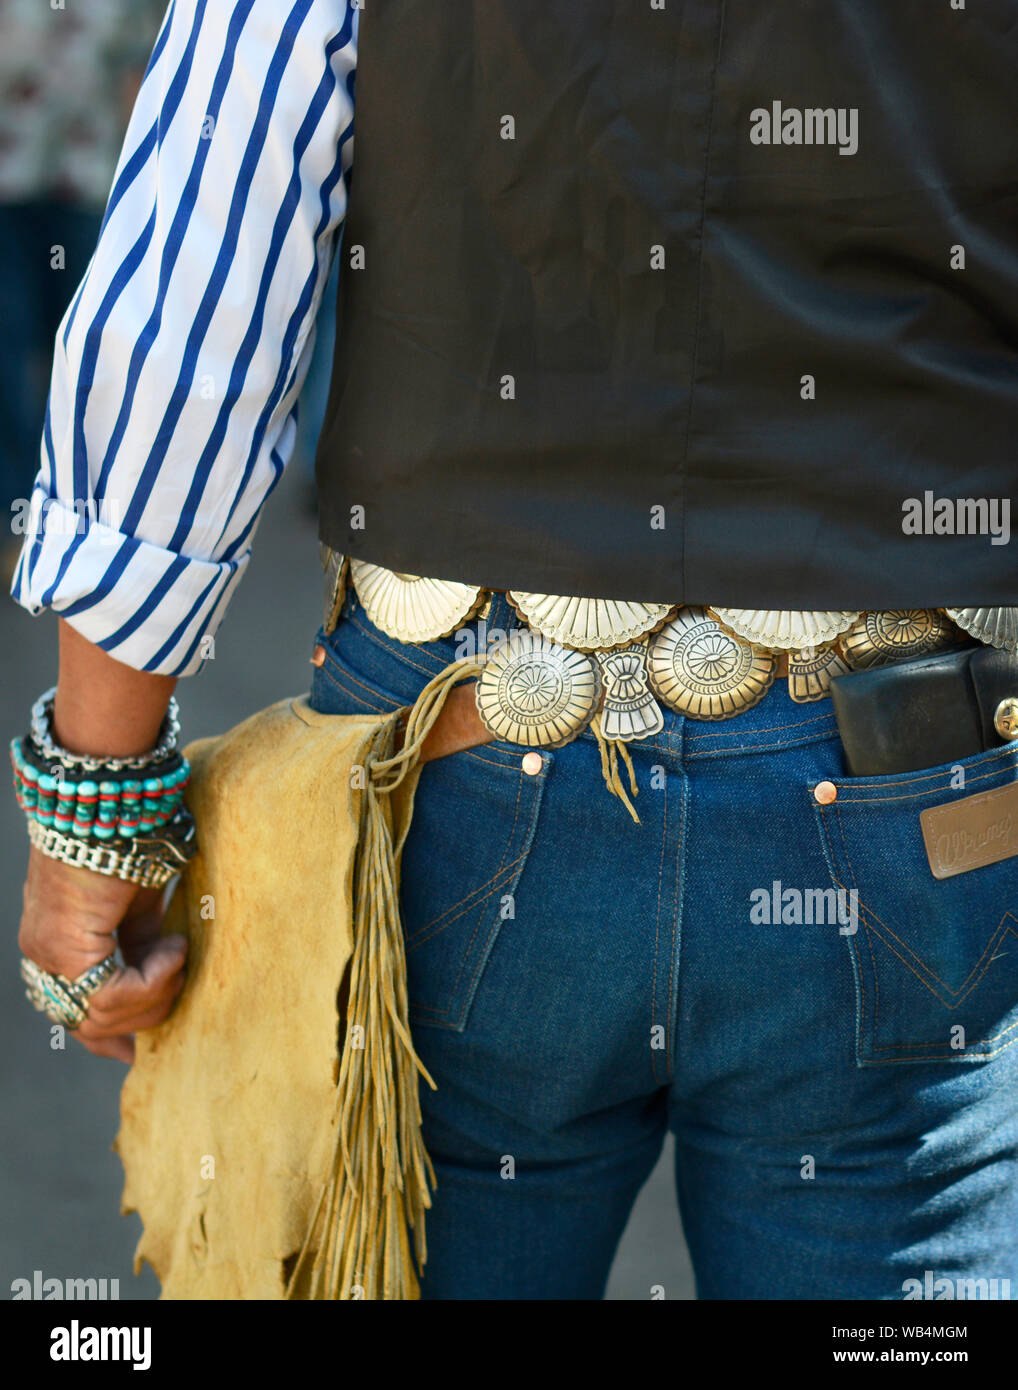 A man wearing western style attire including a concho belt visits the Santa Fe Indian Market in New Mexico, USA Stock Photo